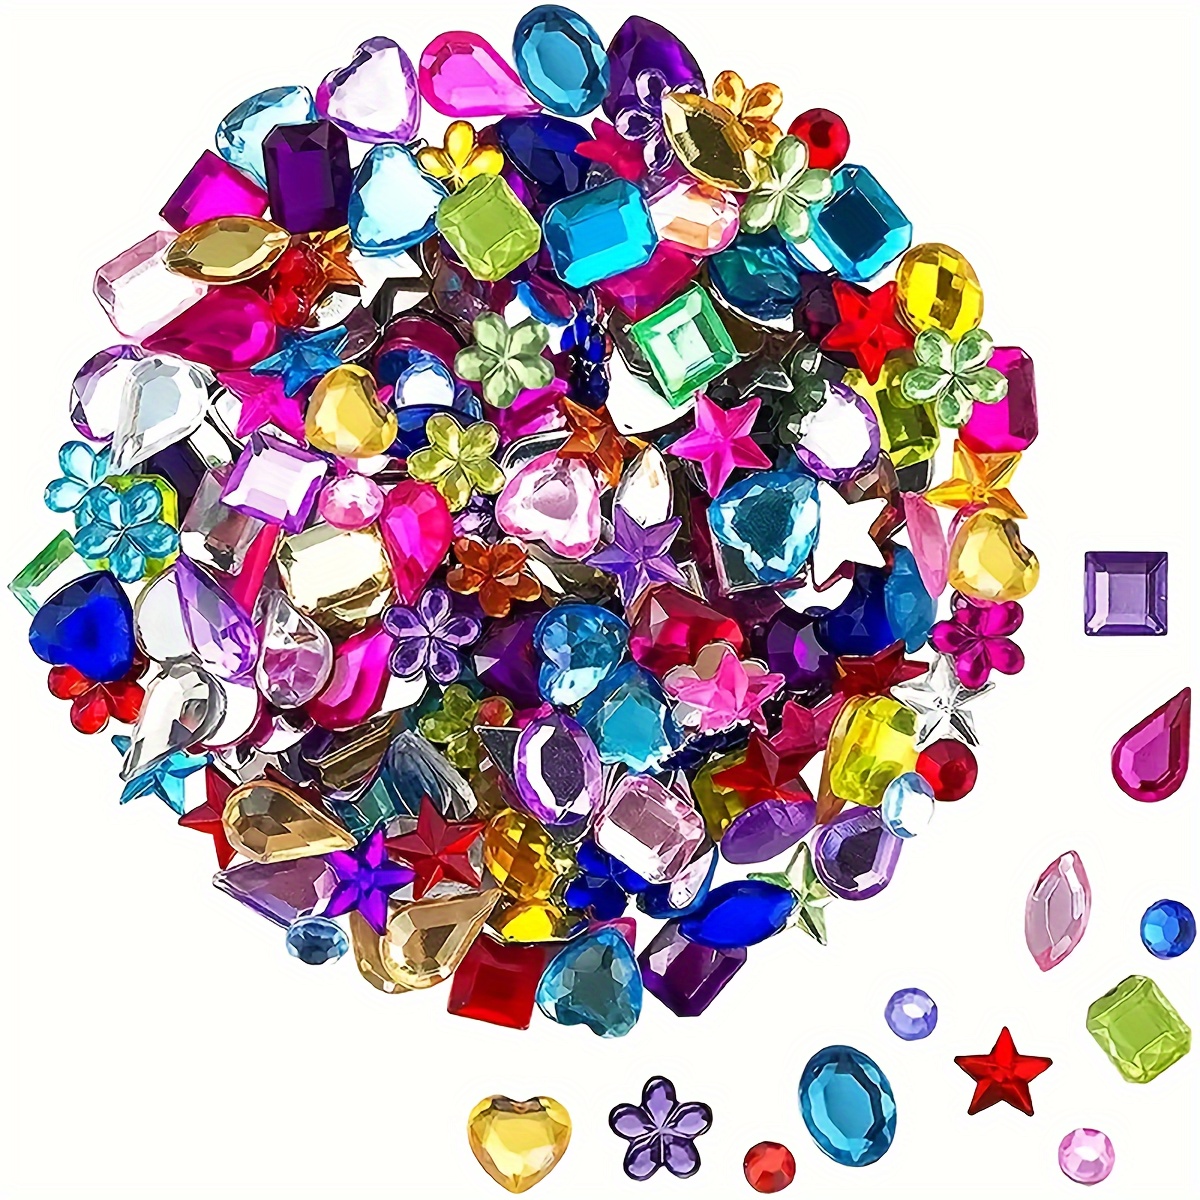 

500/200/100/50pcs Acrylic Rhinestone Set For Crafts And Decorations - Assorted Shapes 6-13mm Gems Perfect For Diy Jewelry Making Party Celebration Activities Accessories